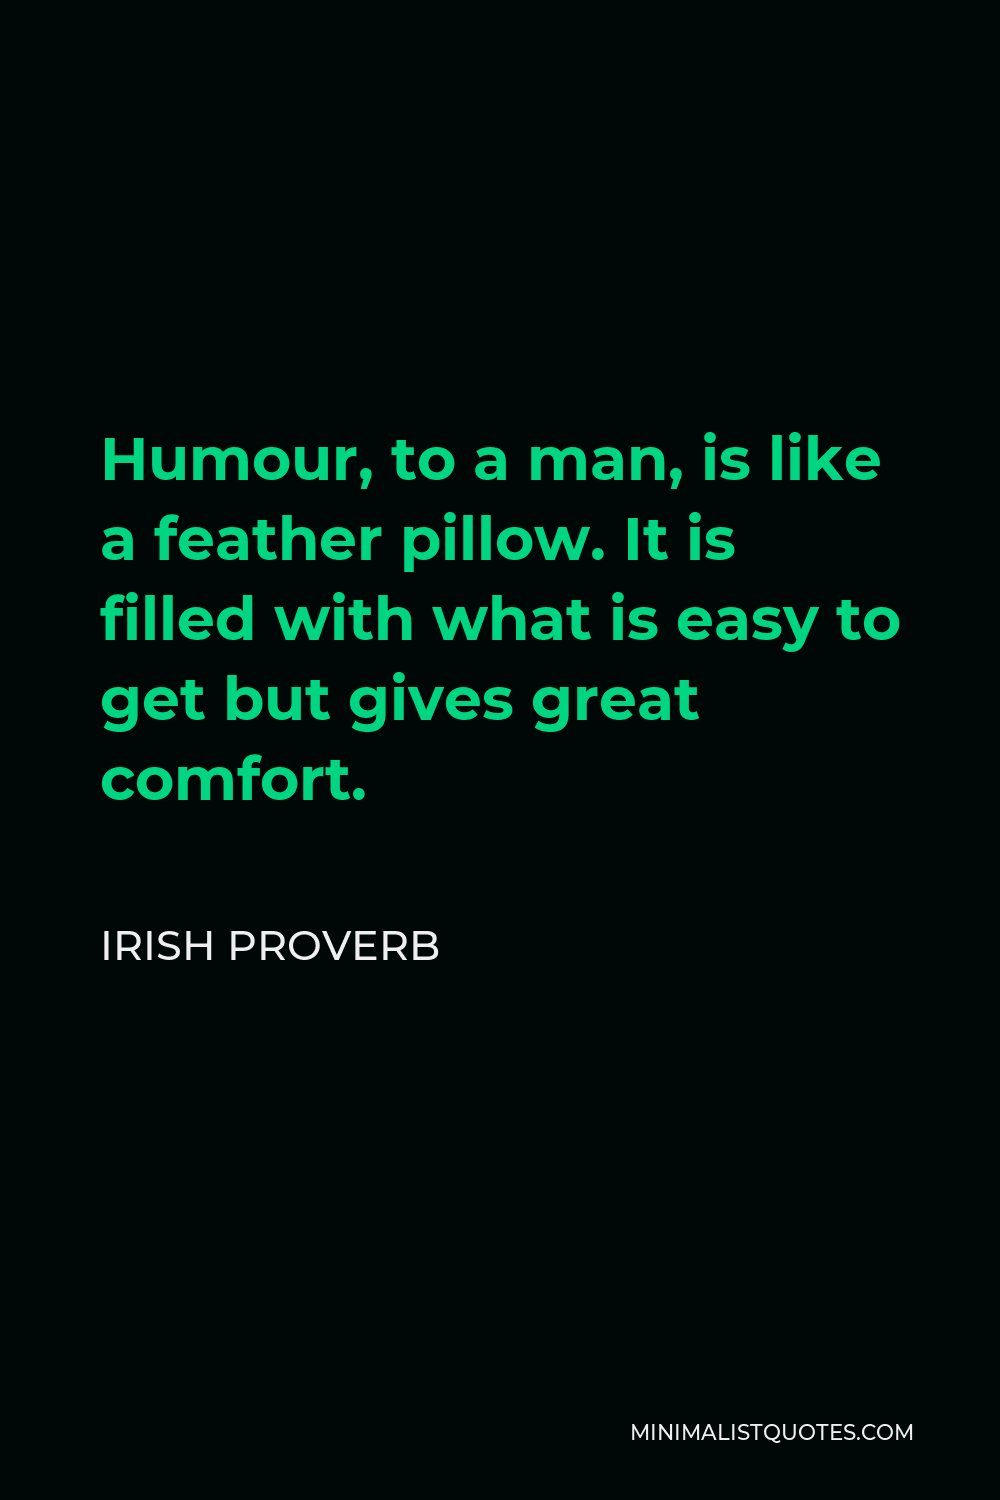 Irish Proverb Quote - Humour, to a man, is like a feather pillow. It is filled with what is easy to get but gives great comfort.